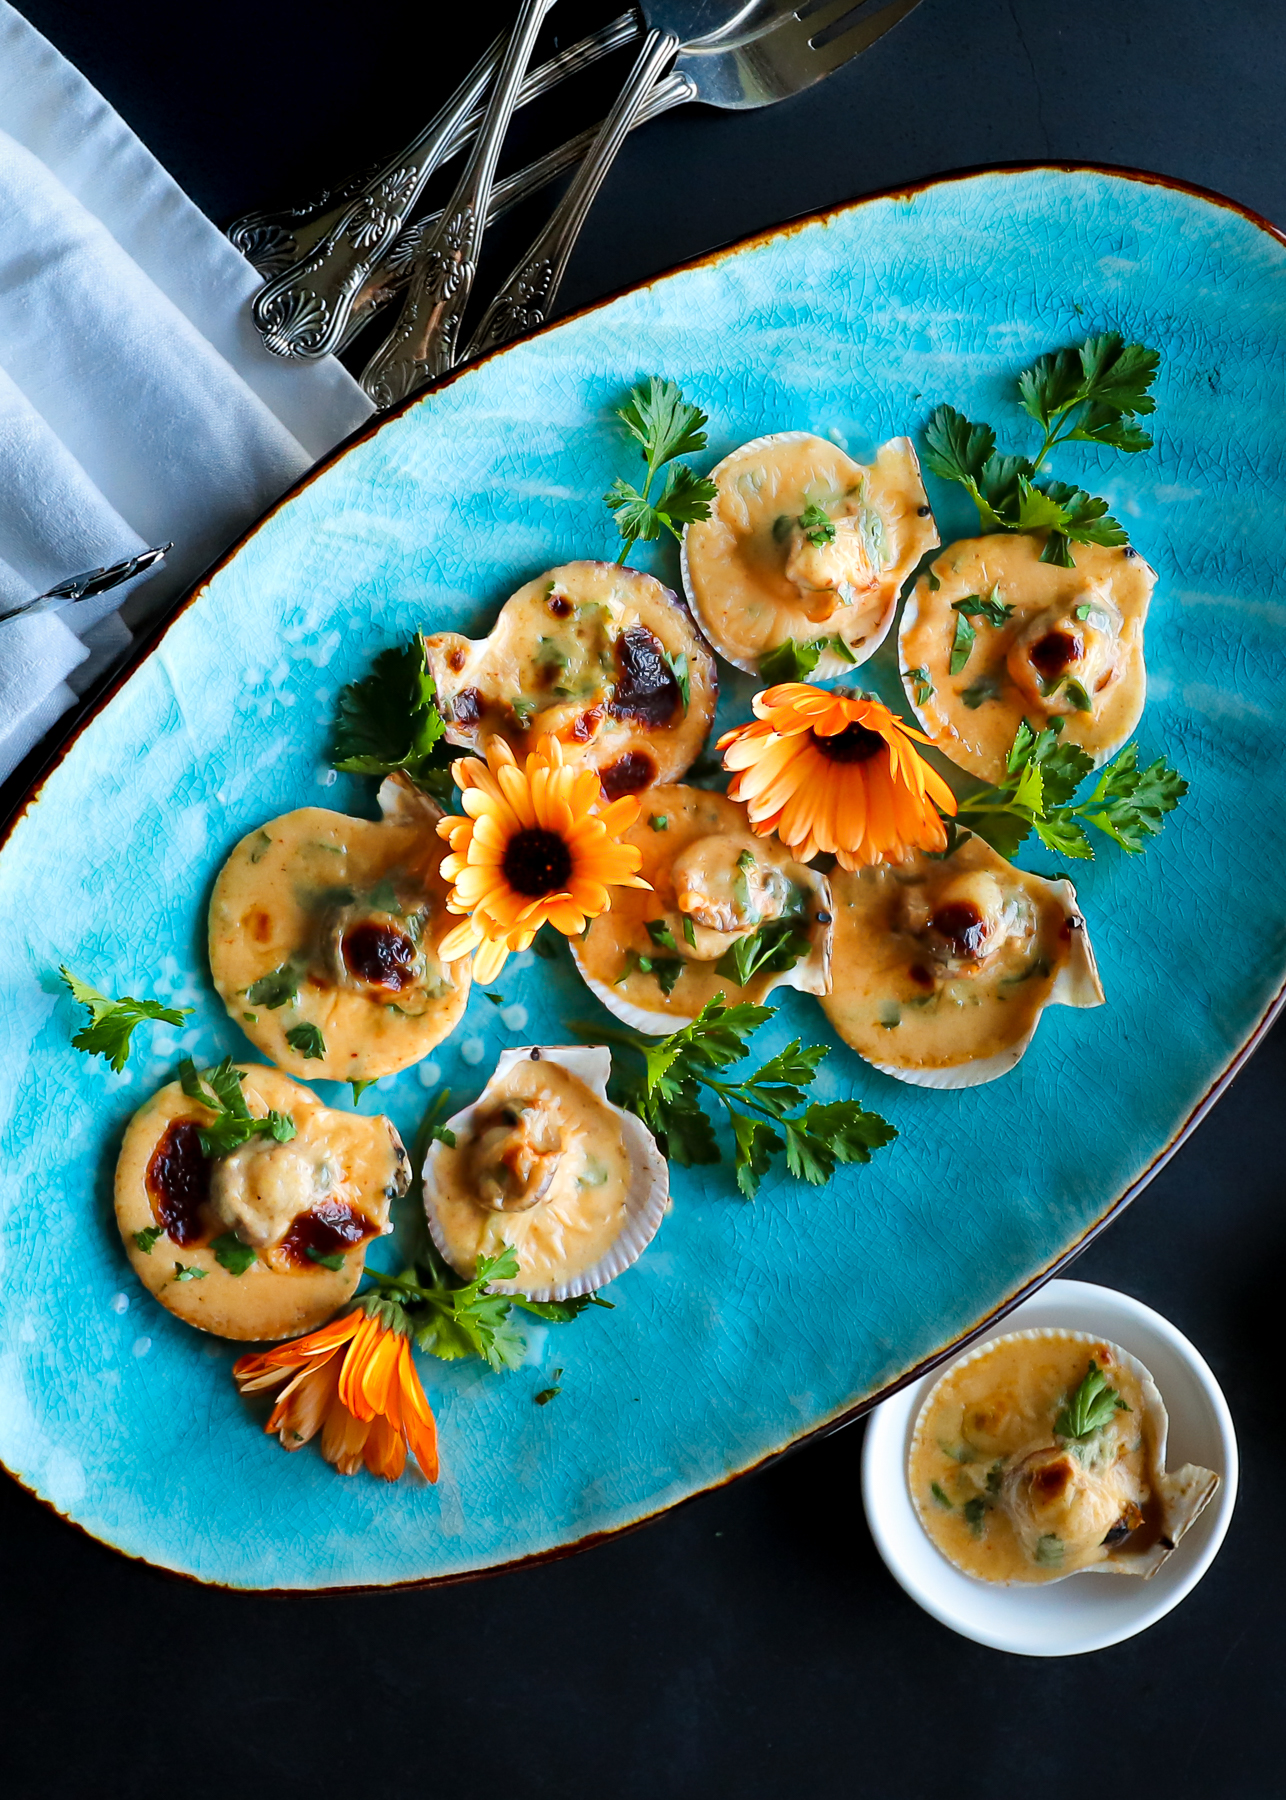 Scallops broiled in their shell arranged on a bright blue plate. Garnished with edible calendula flowers, the plate sits on a black table with forks and white napkins to the left.